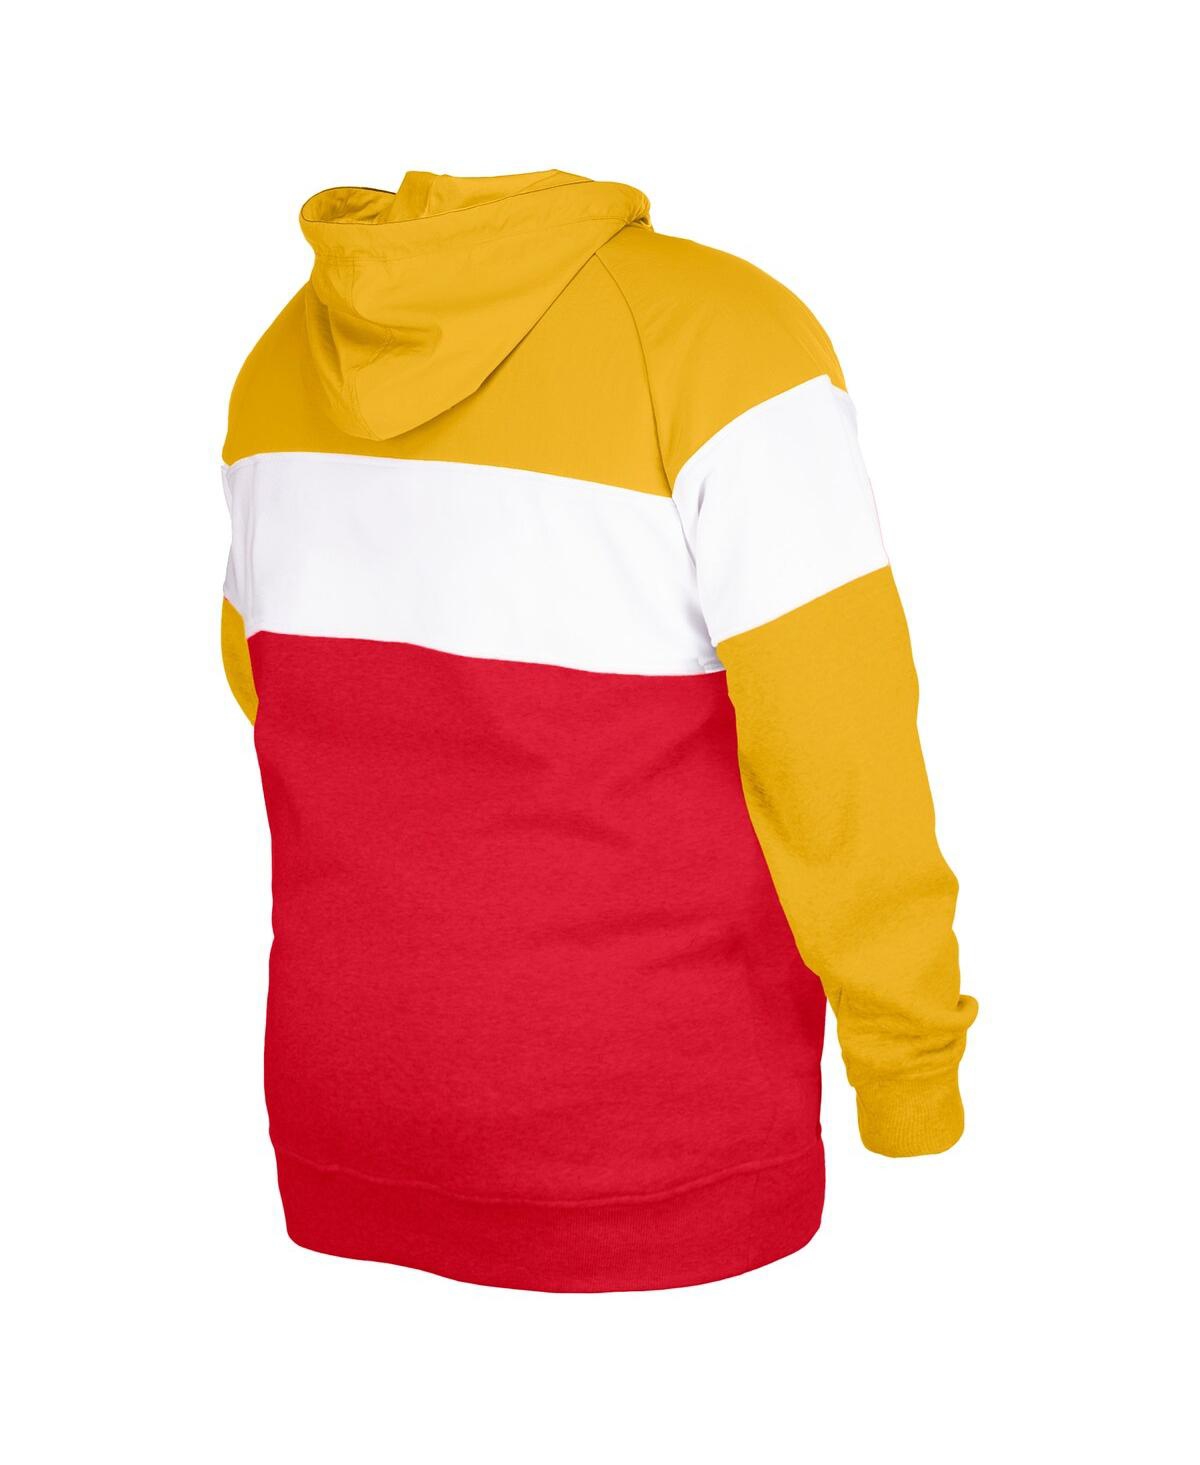 Shop New Era Men's  Red Kansas City Chiefs Big And Tall Current Colorblock Pullover Hoodie